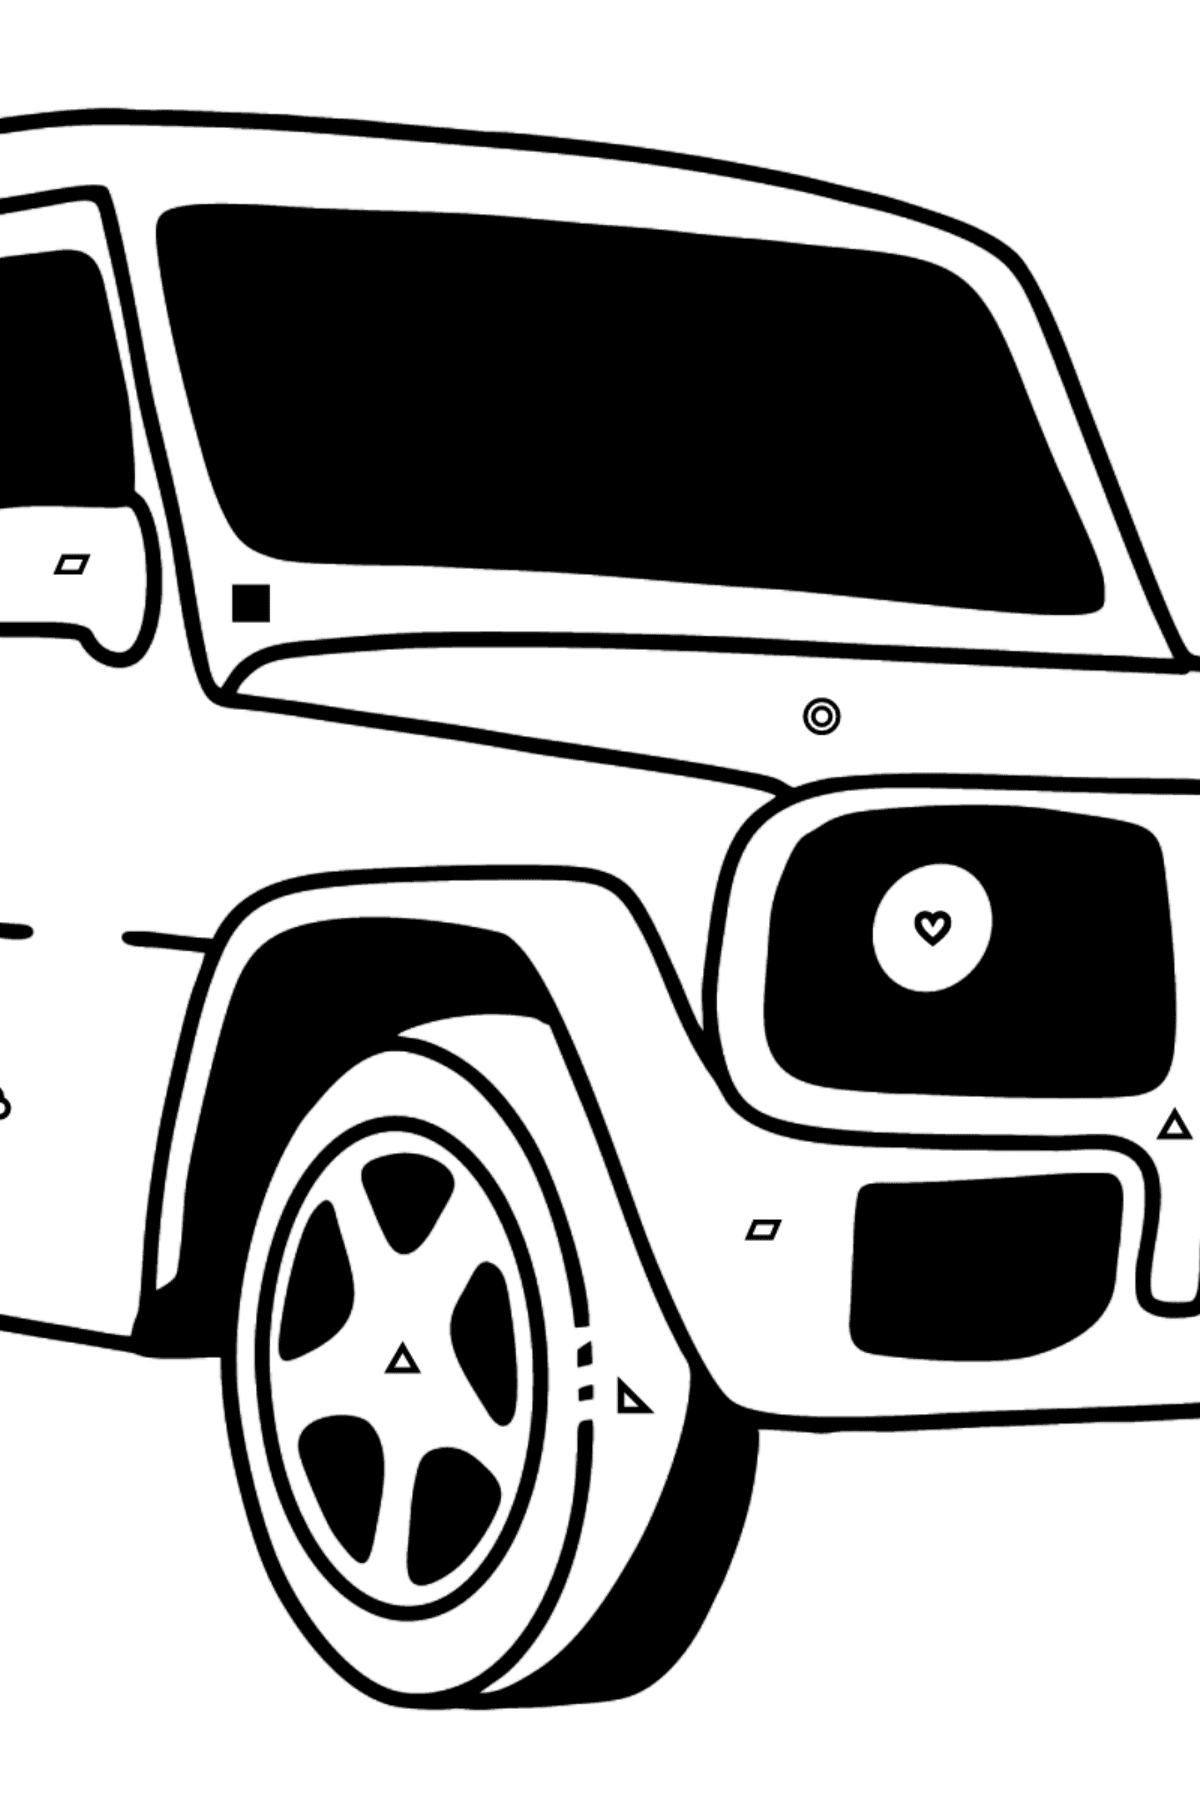 Mercedes-Benz G-Class SUV coloring page - Coloring by Symbols and Geometric Shapes for Kids